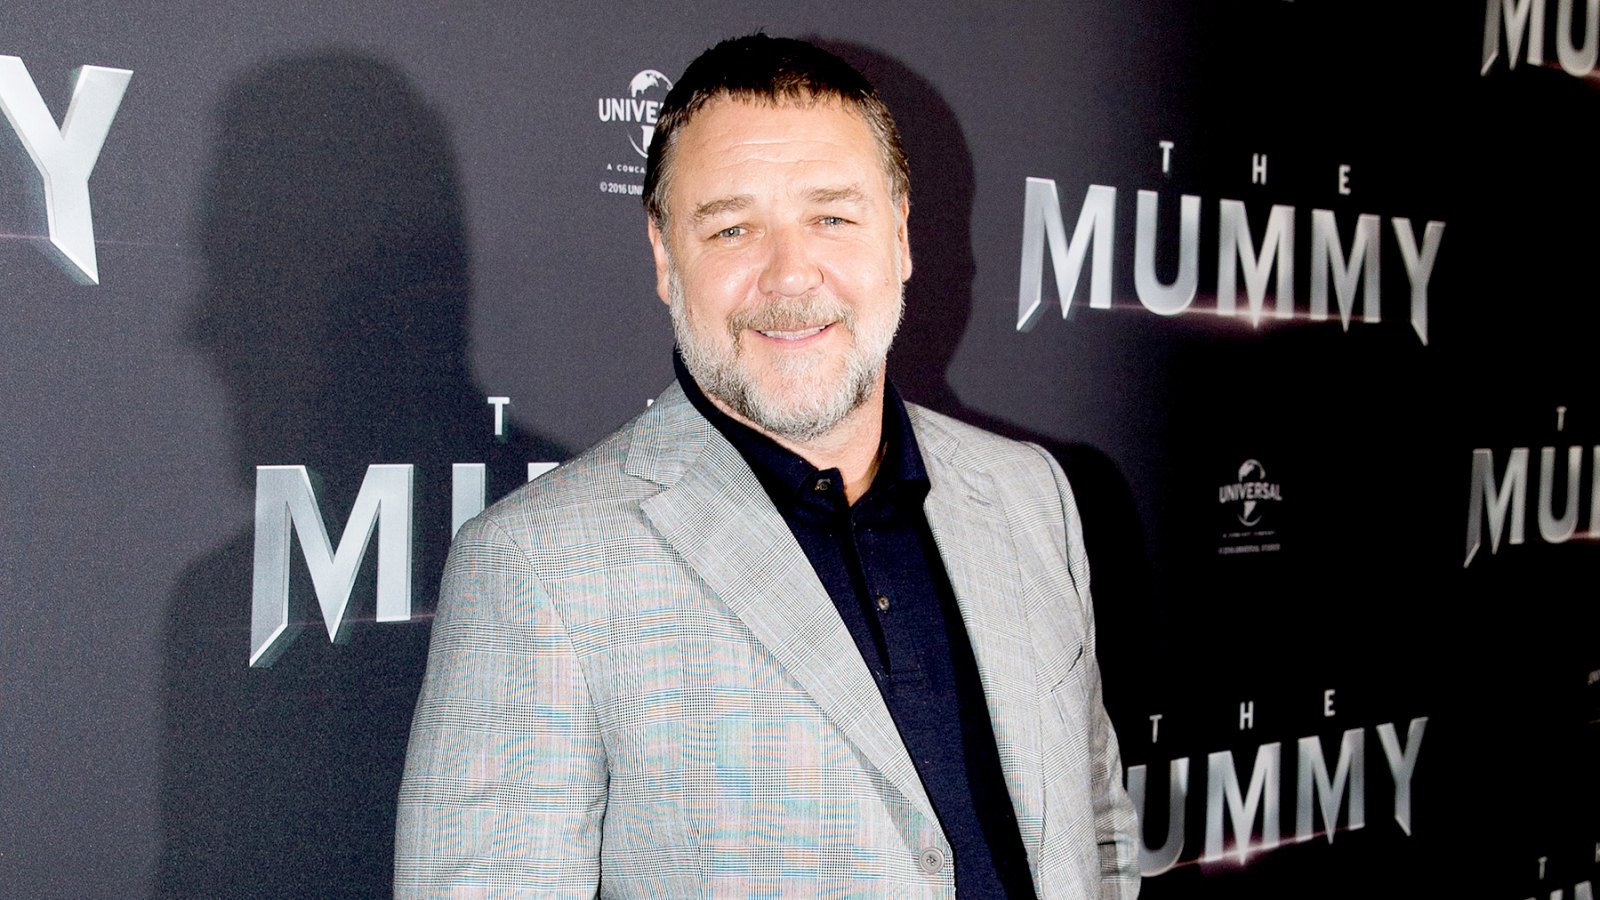 Russell Crowe arrives ahead of The Mummy Australian Premiere at State Theatre on May 22, 2017 in Sydney, Australia.